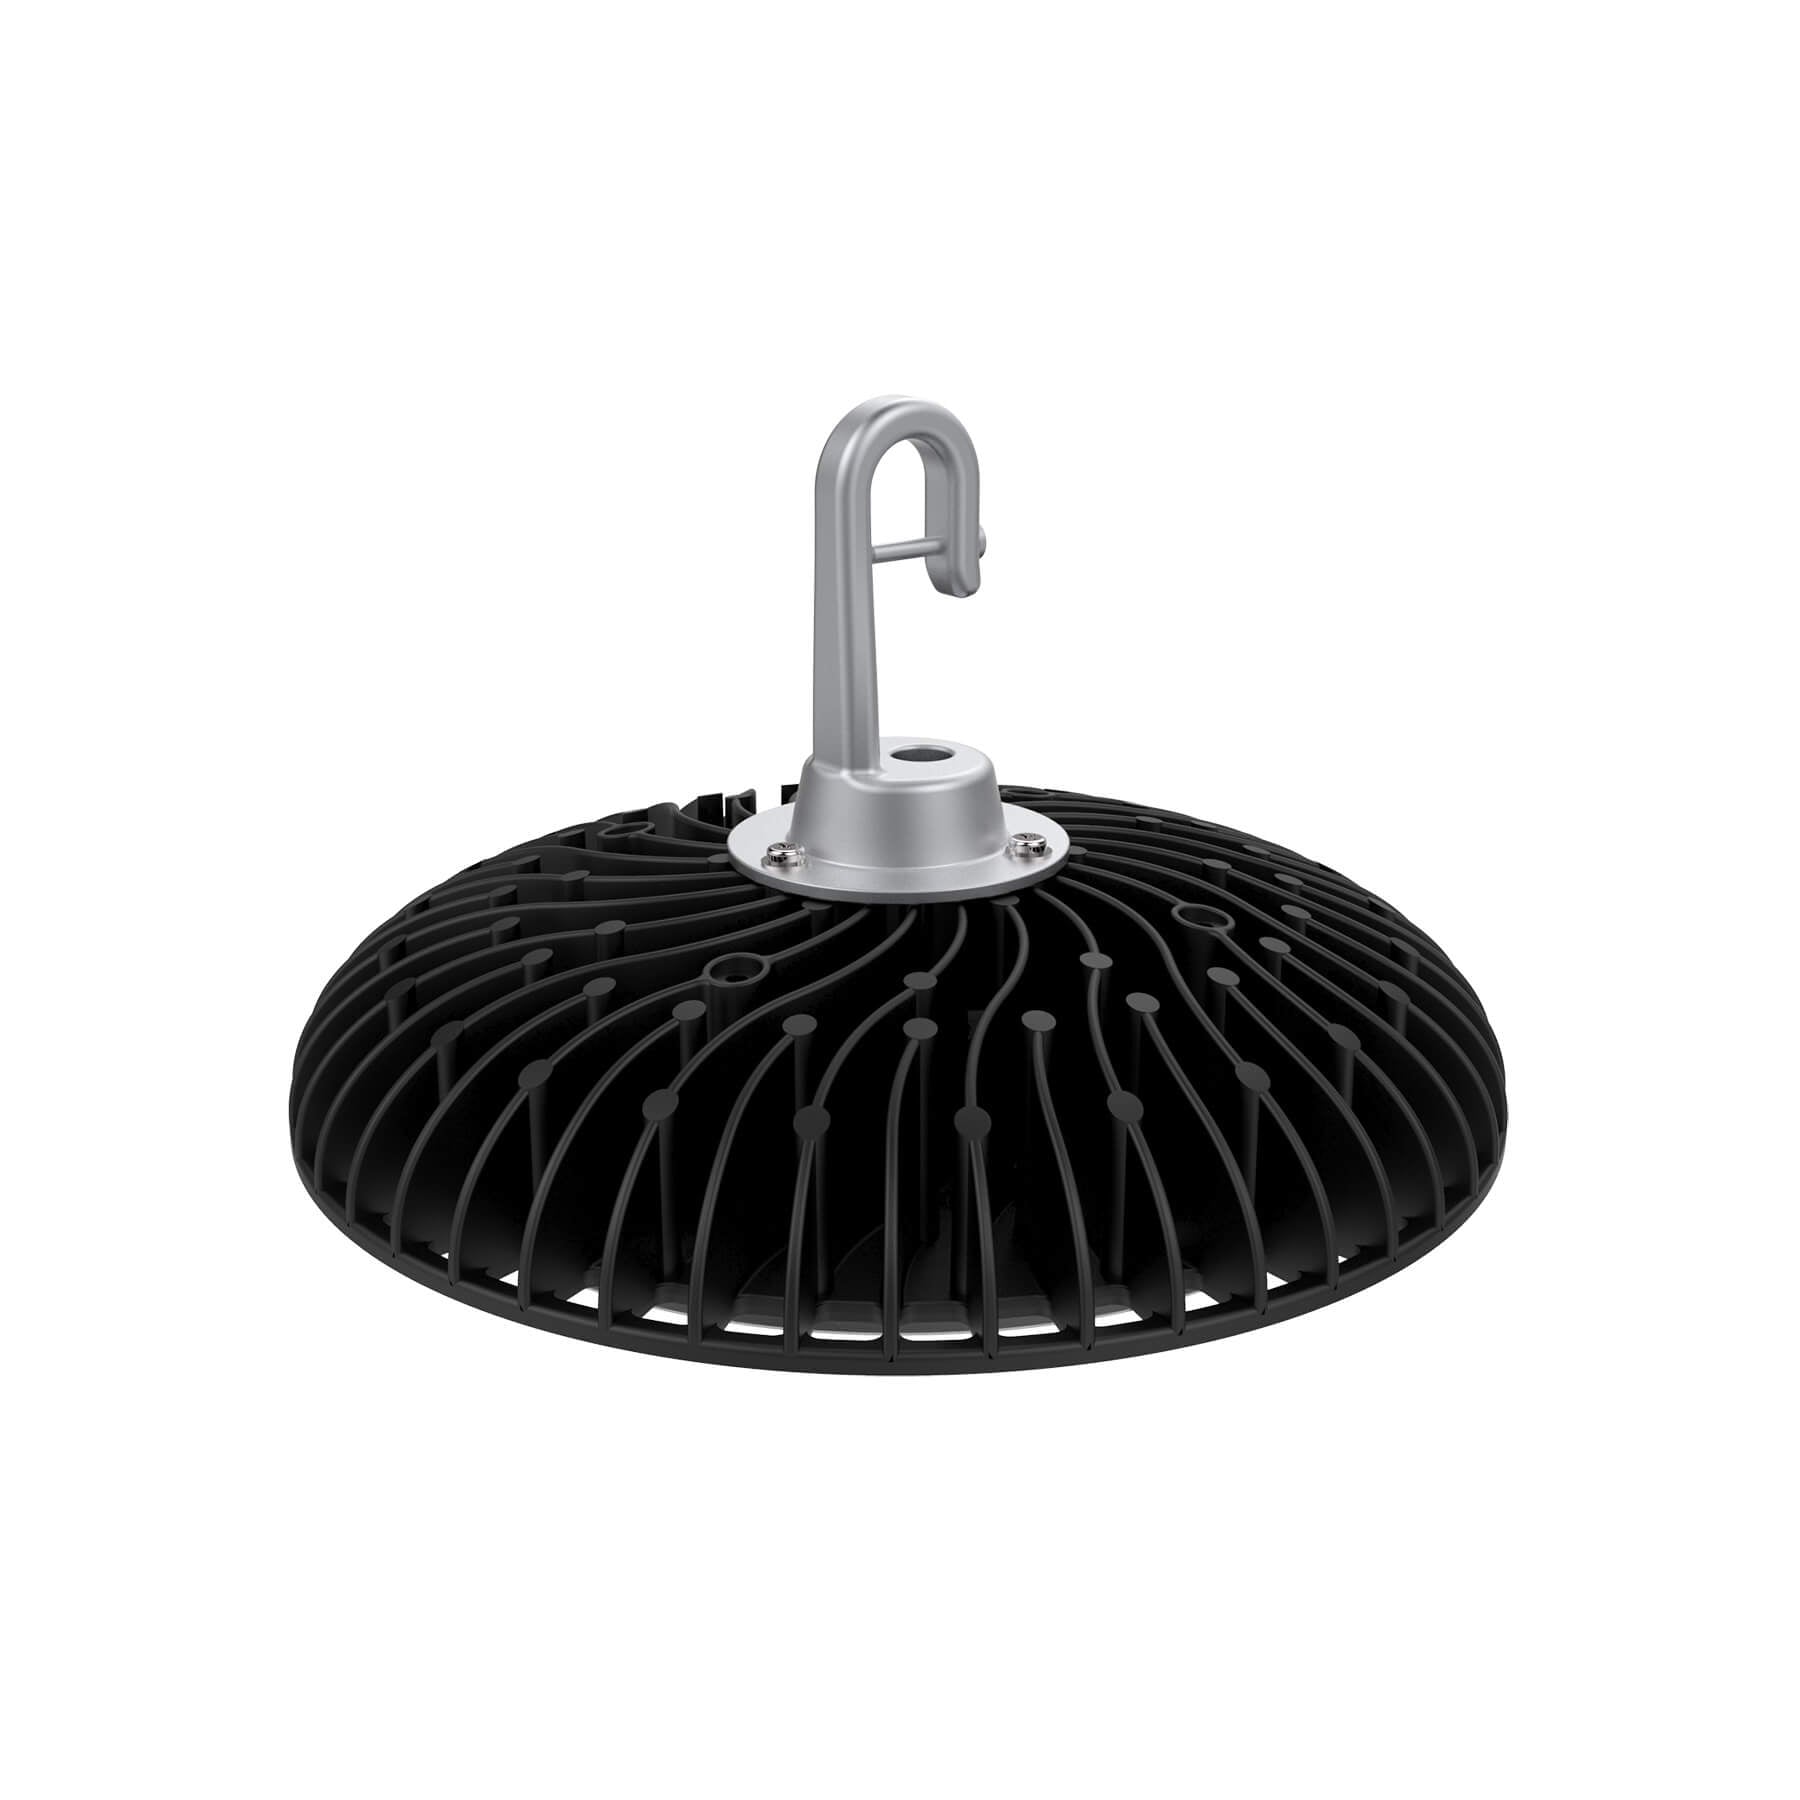 150W LED High Bay Light Fitting, Top View